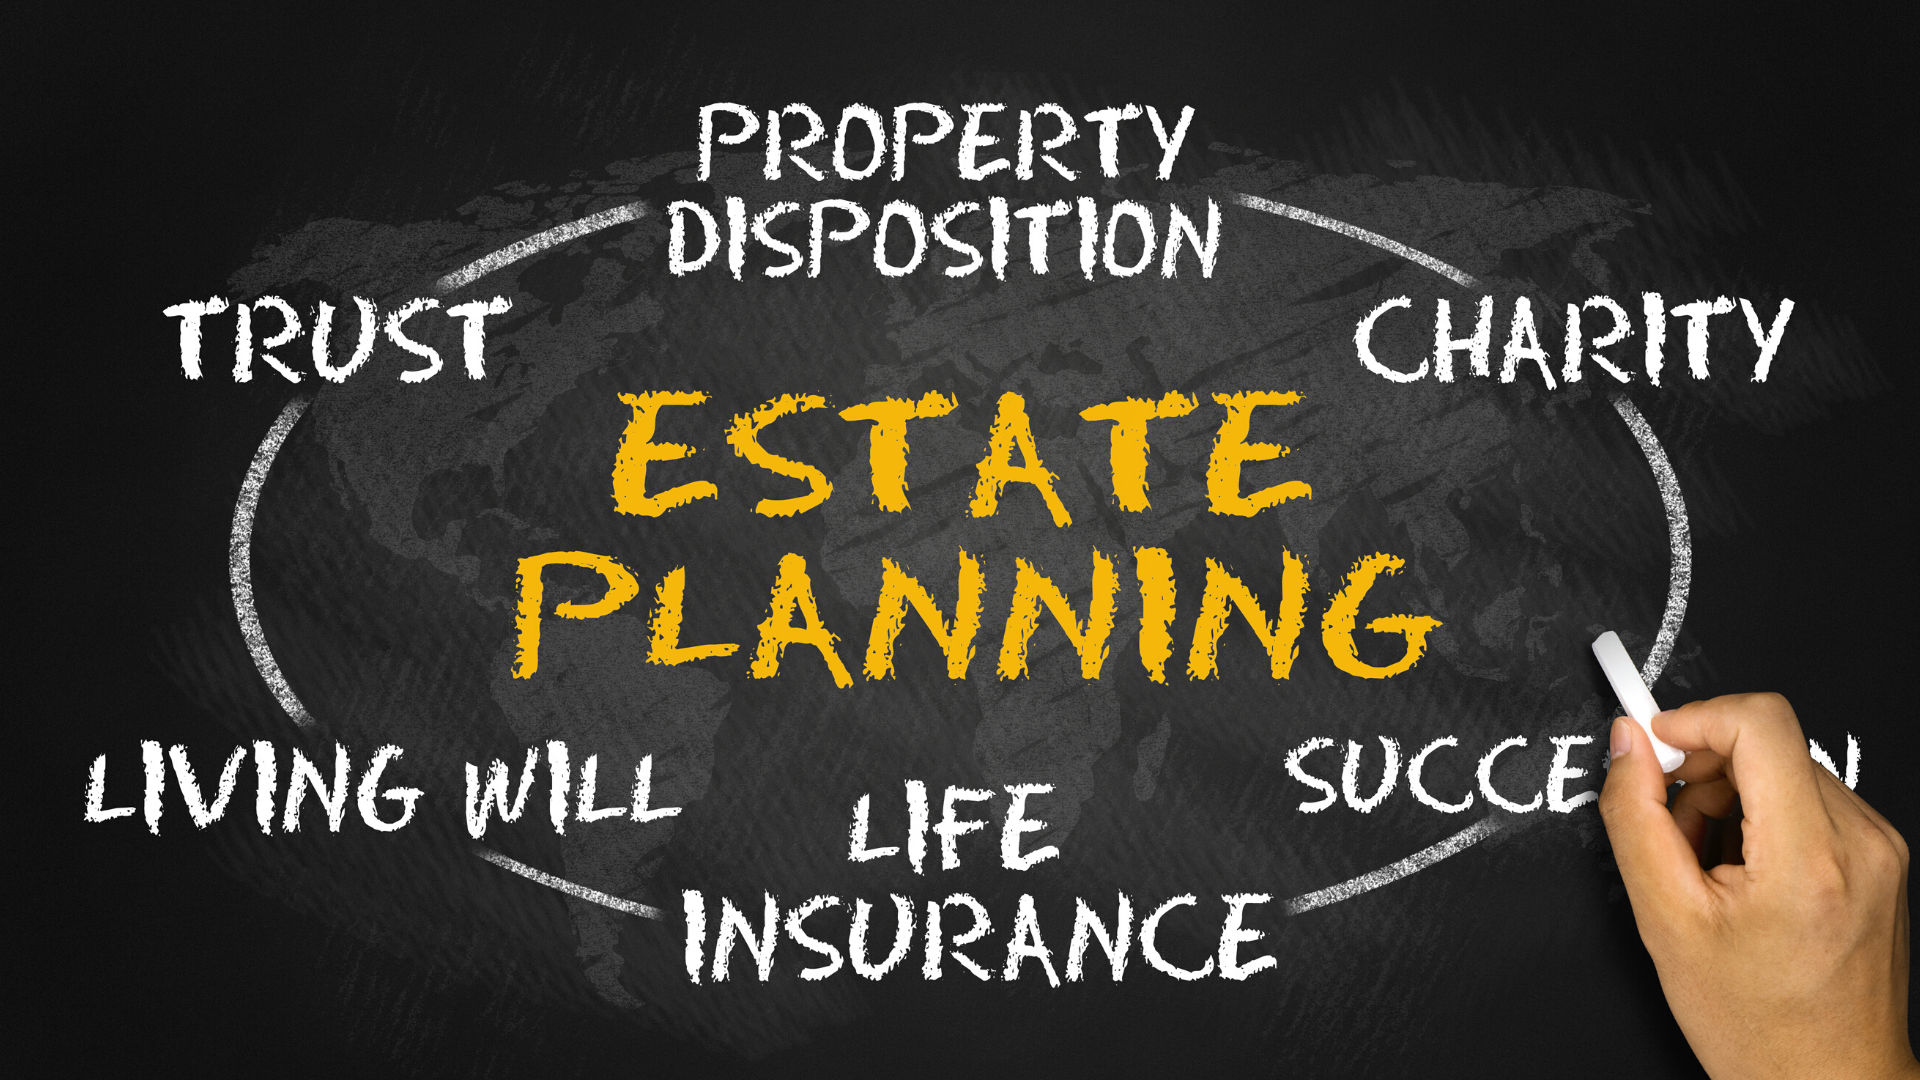 How to Ensure Your Life Wishes Are Granted Through Effective Estate Planning